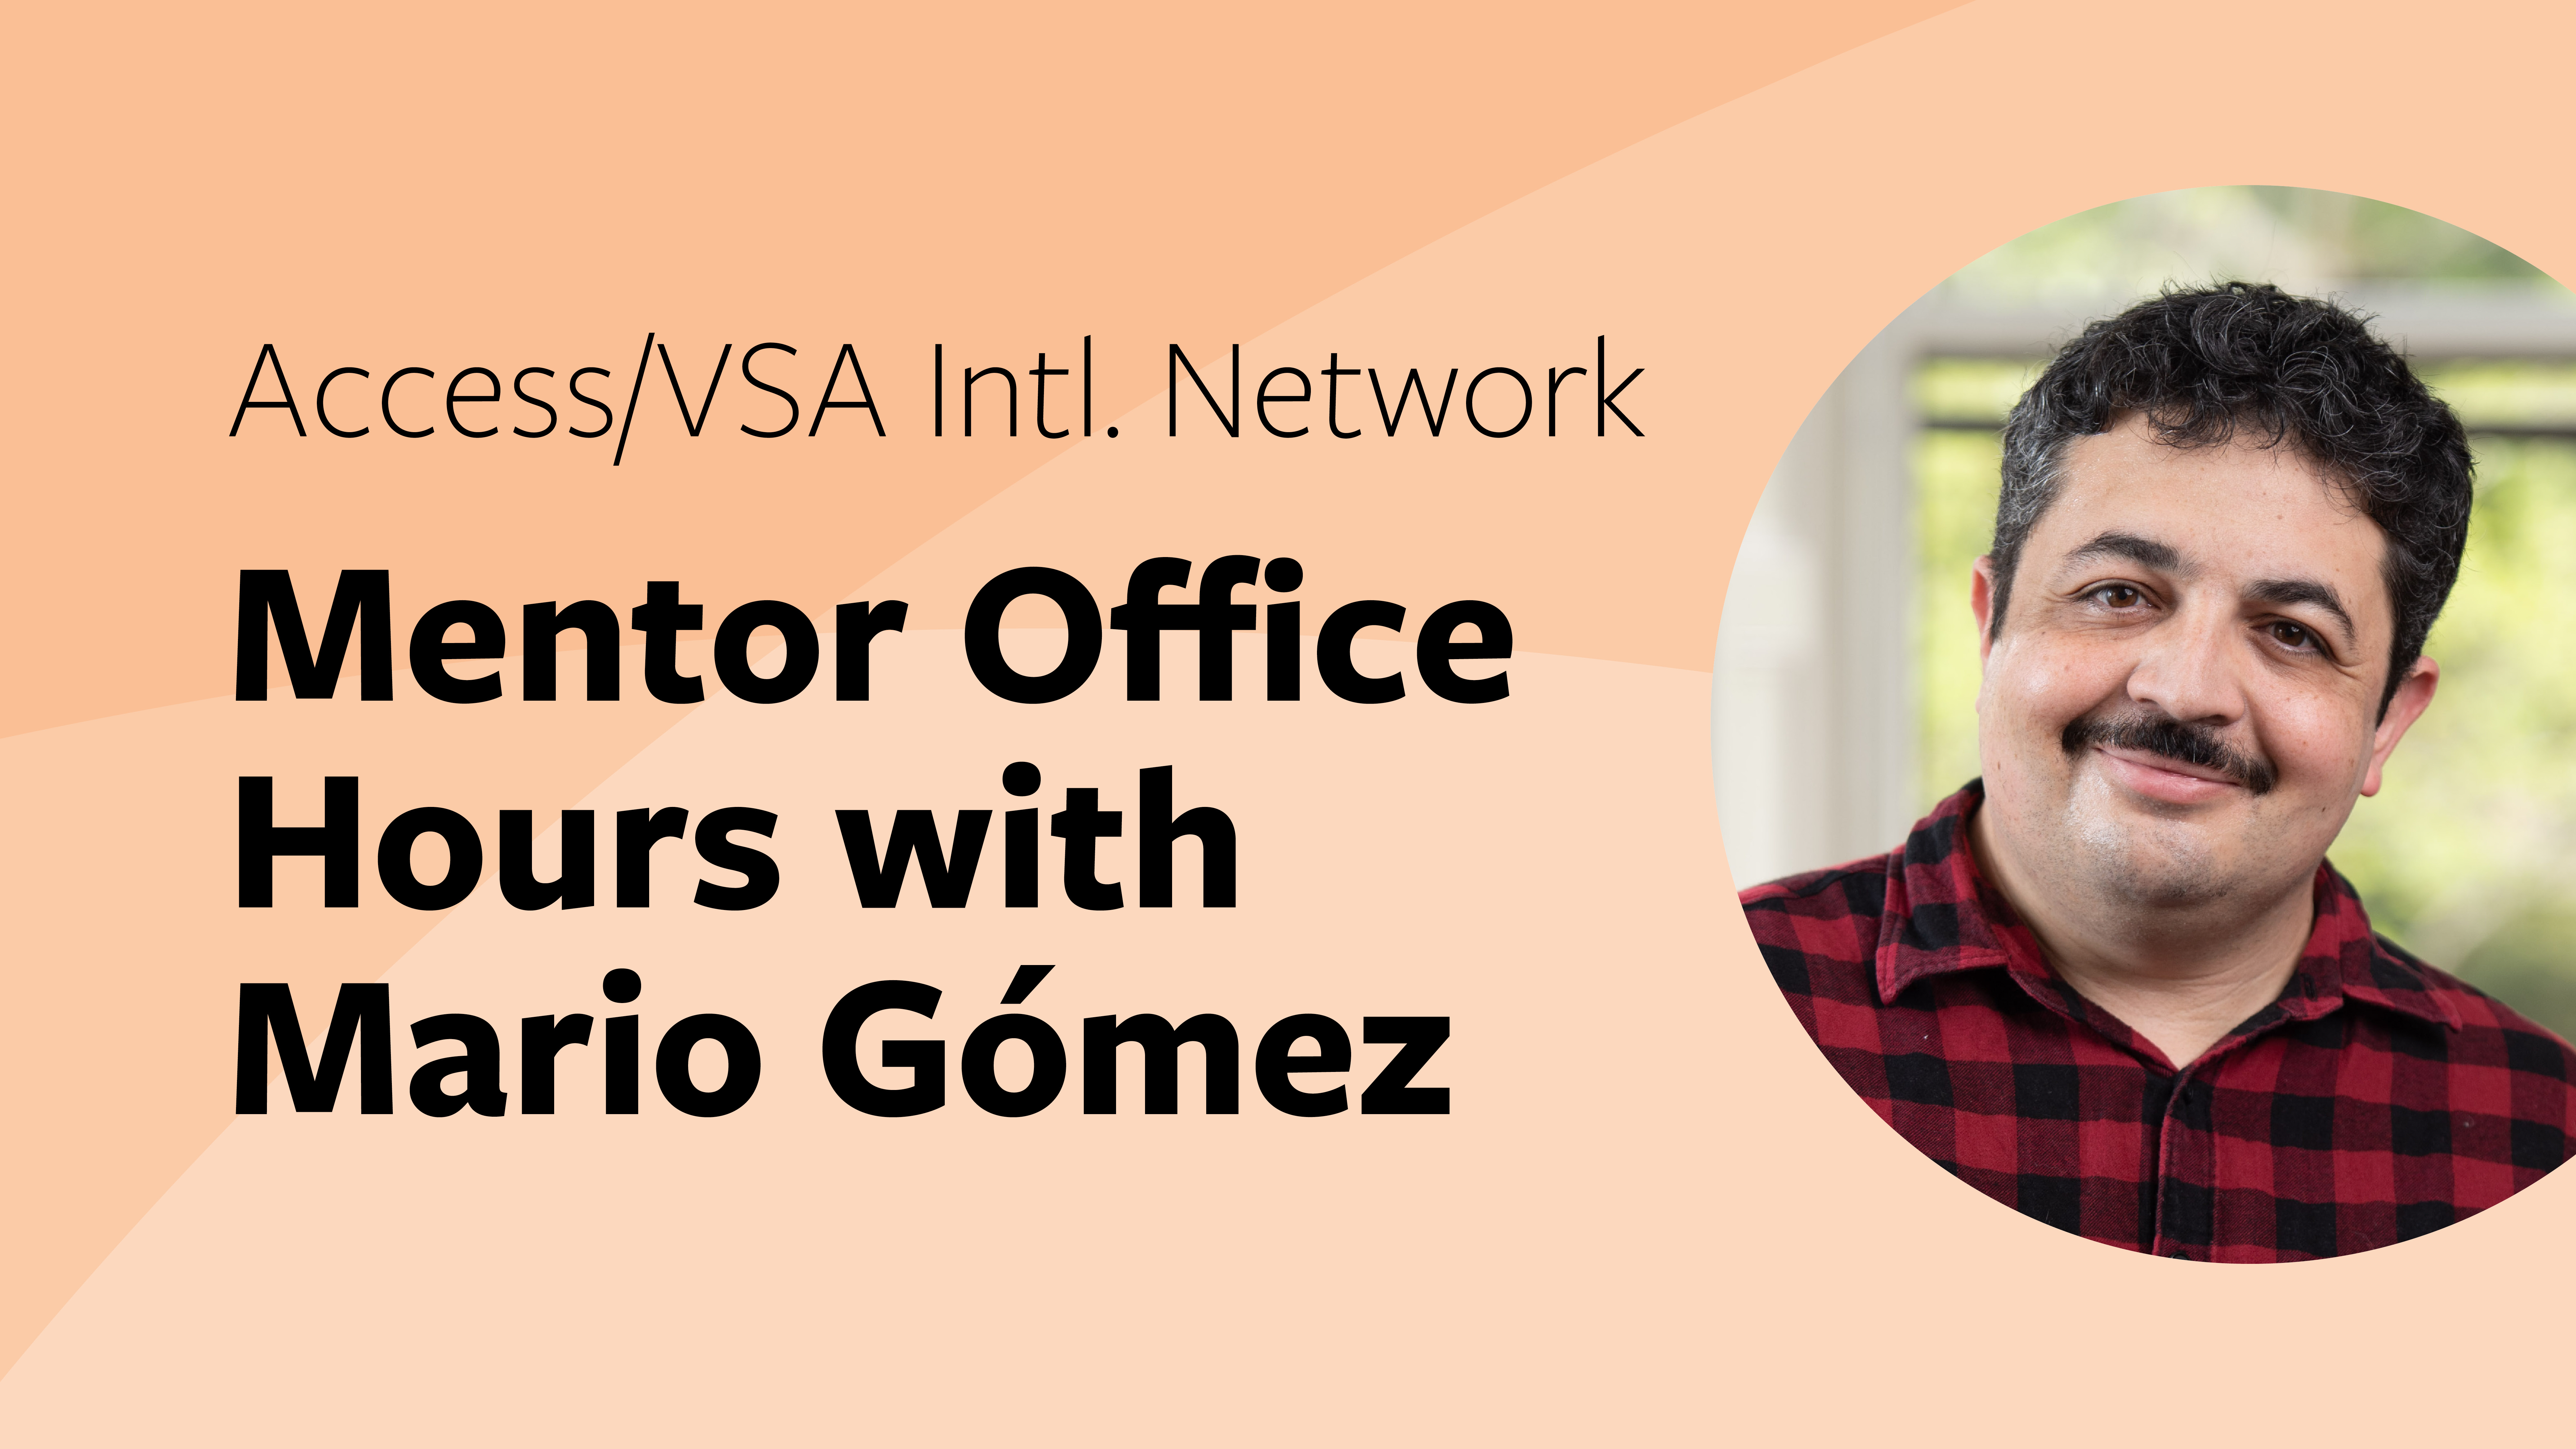 Orange background with the text "Access/VSA Intl. Network Mentor Office Hours with Mario Gómez" and a photo of Mario Gomez on the right.